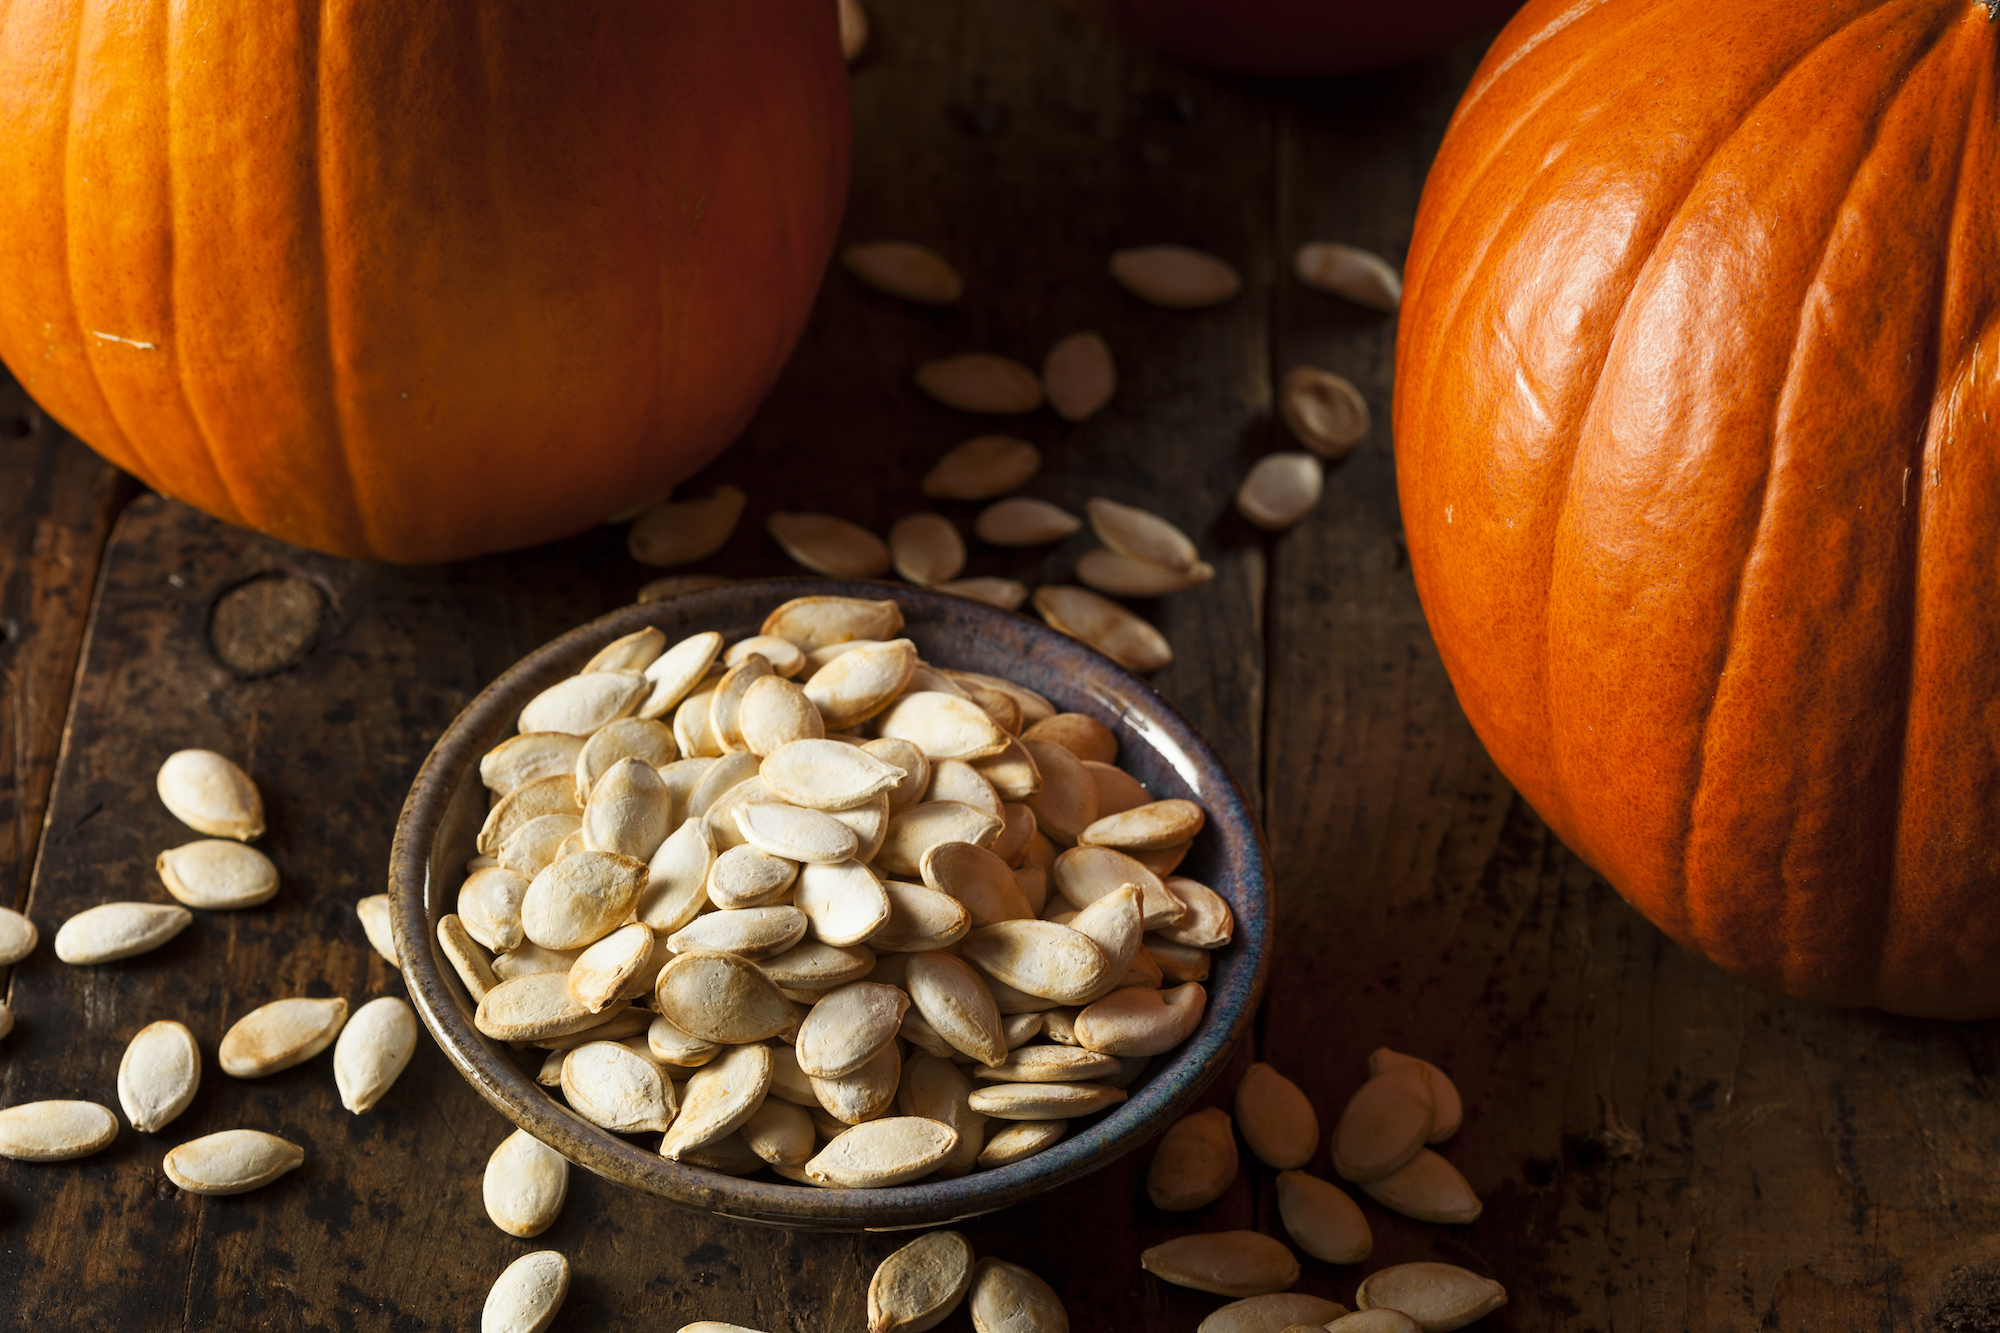 Pumpkin seeds are full of health benefits and make an easy snack. You can buy them by the bag at a local grocery store, or you can roast your own.